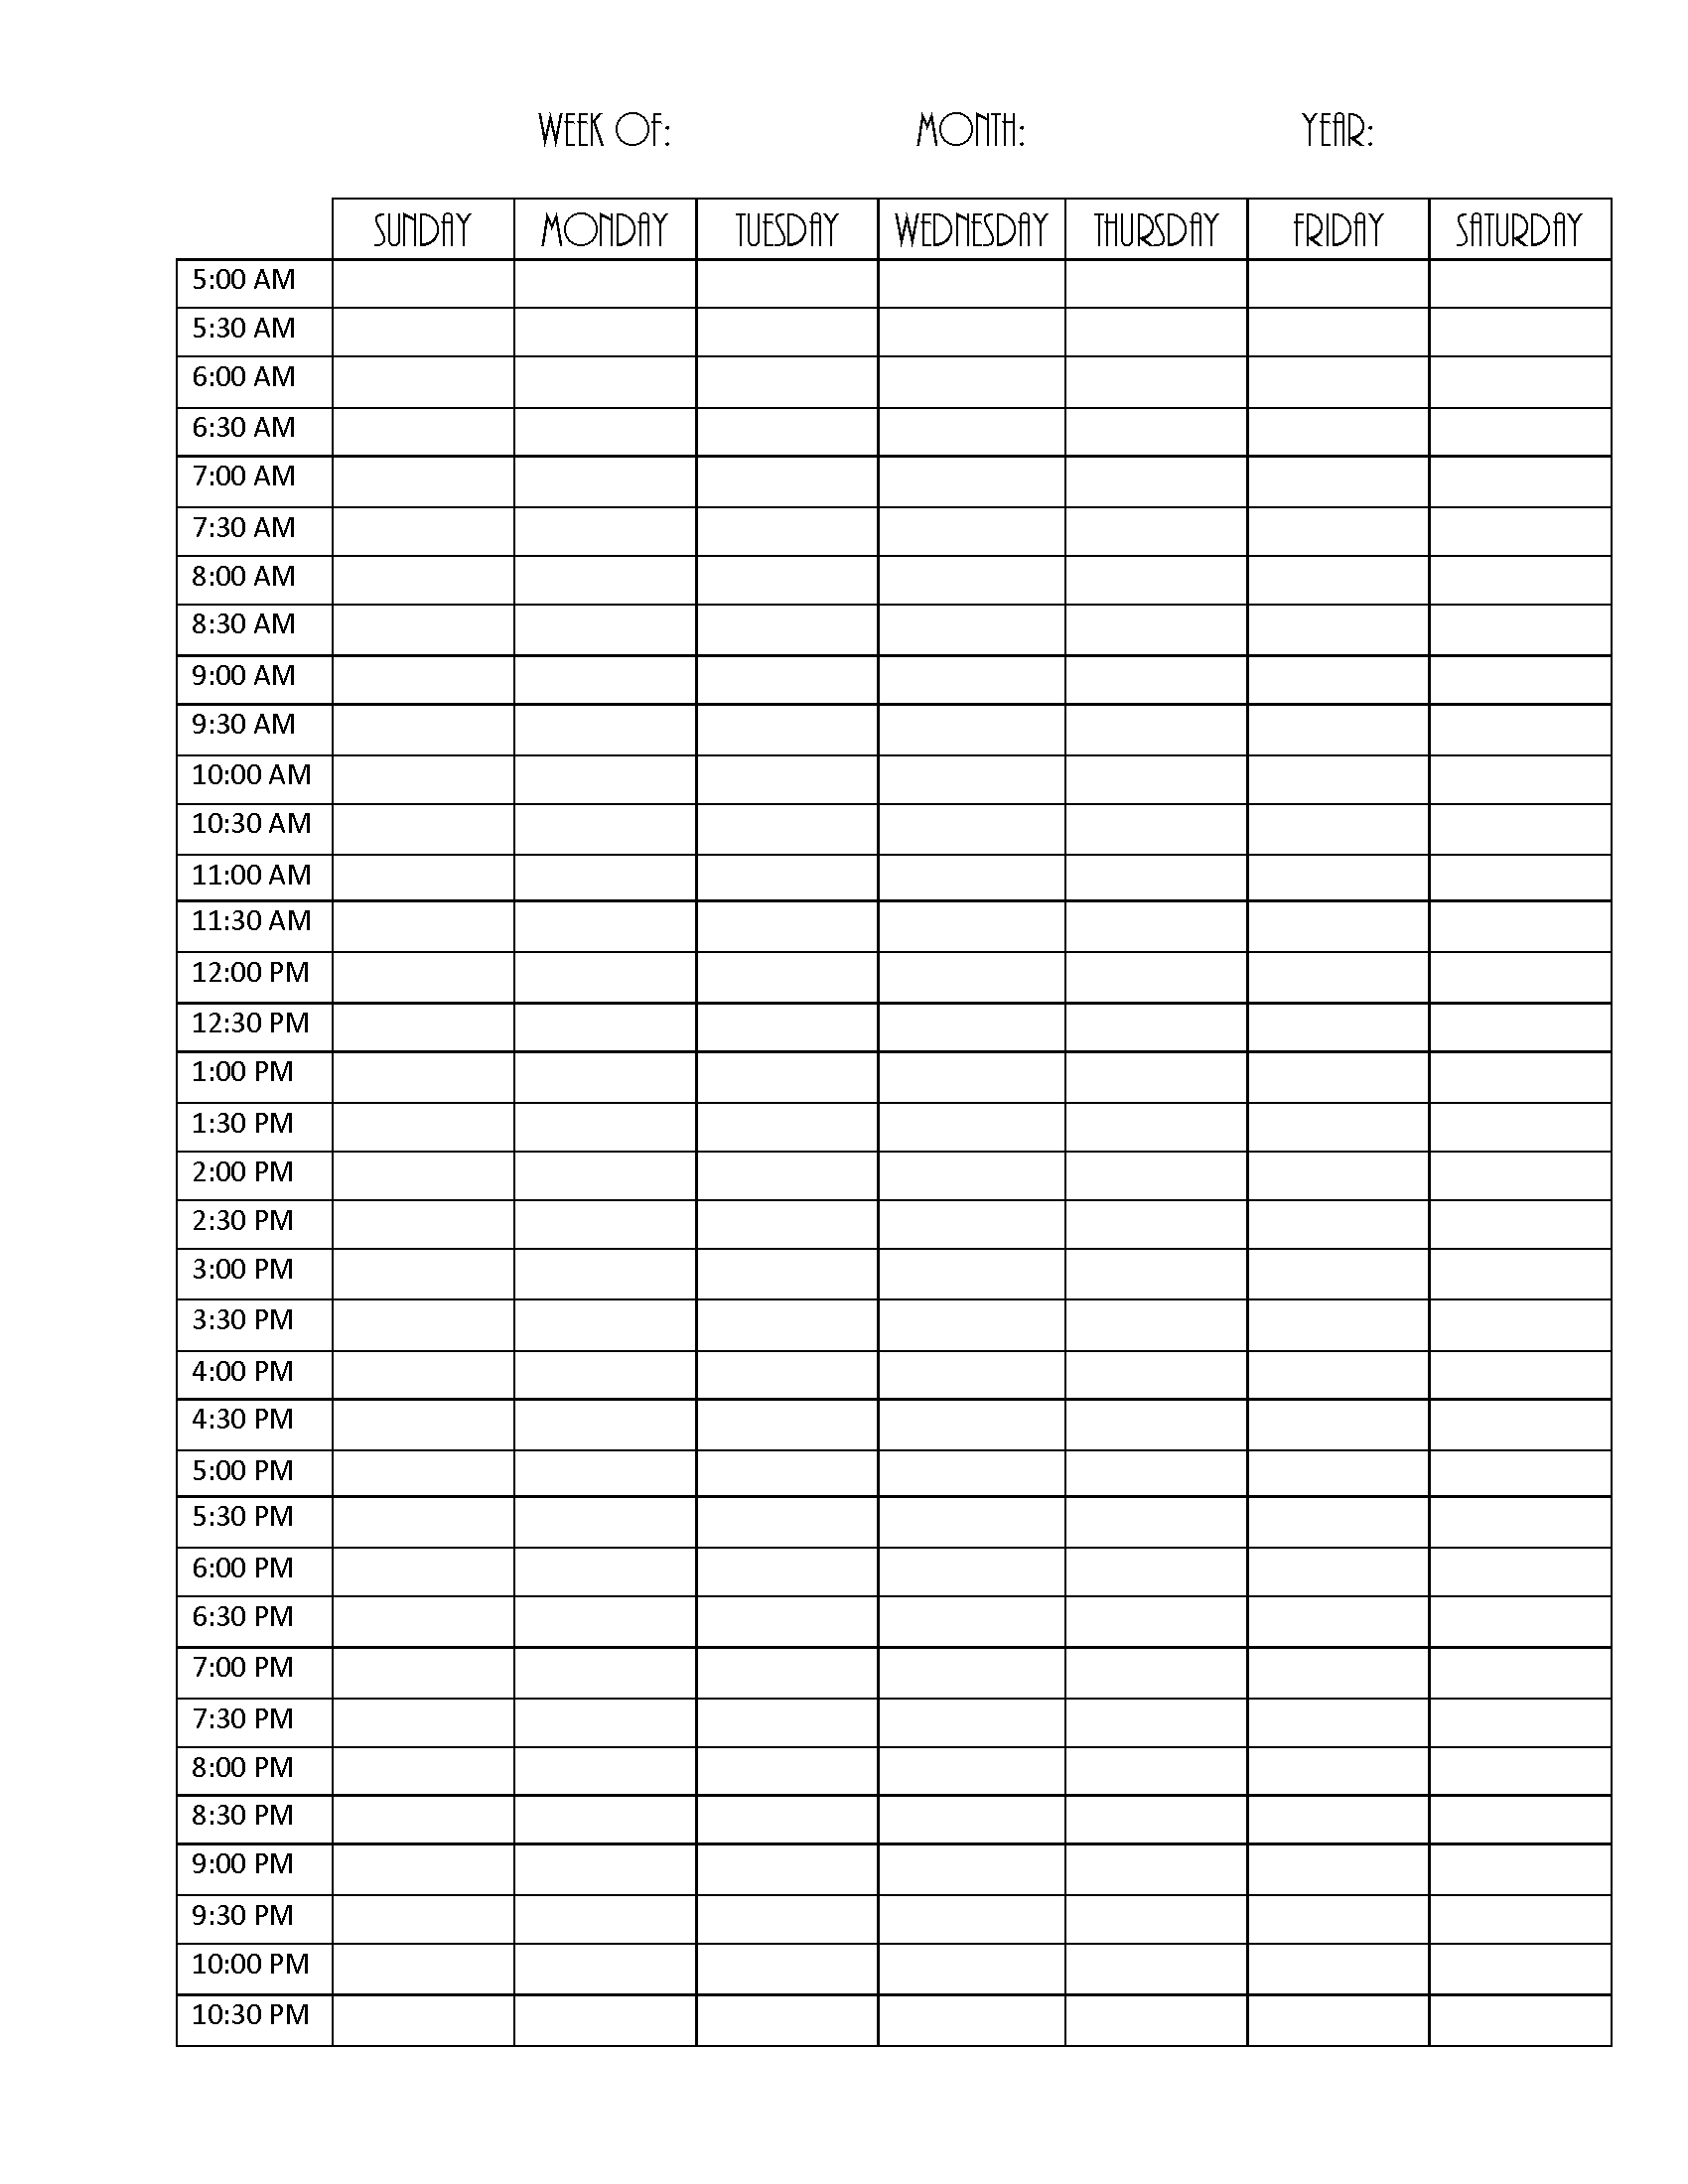 blank daily time schedule